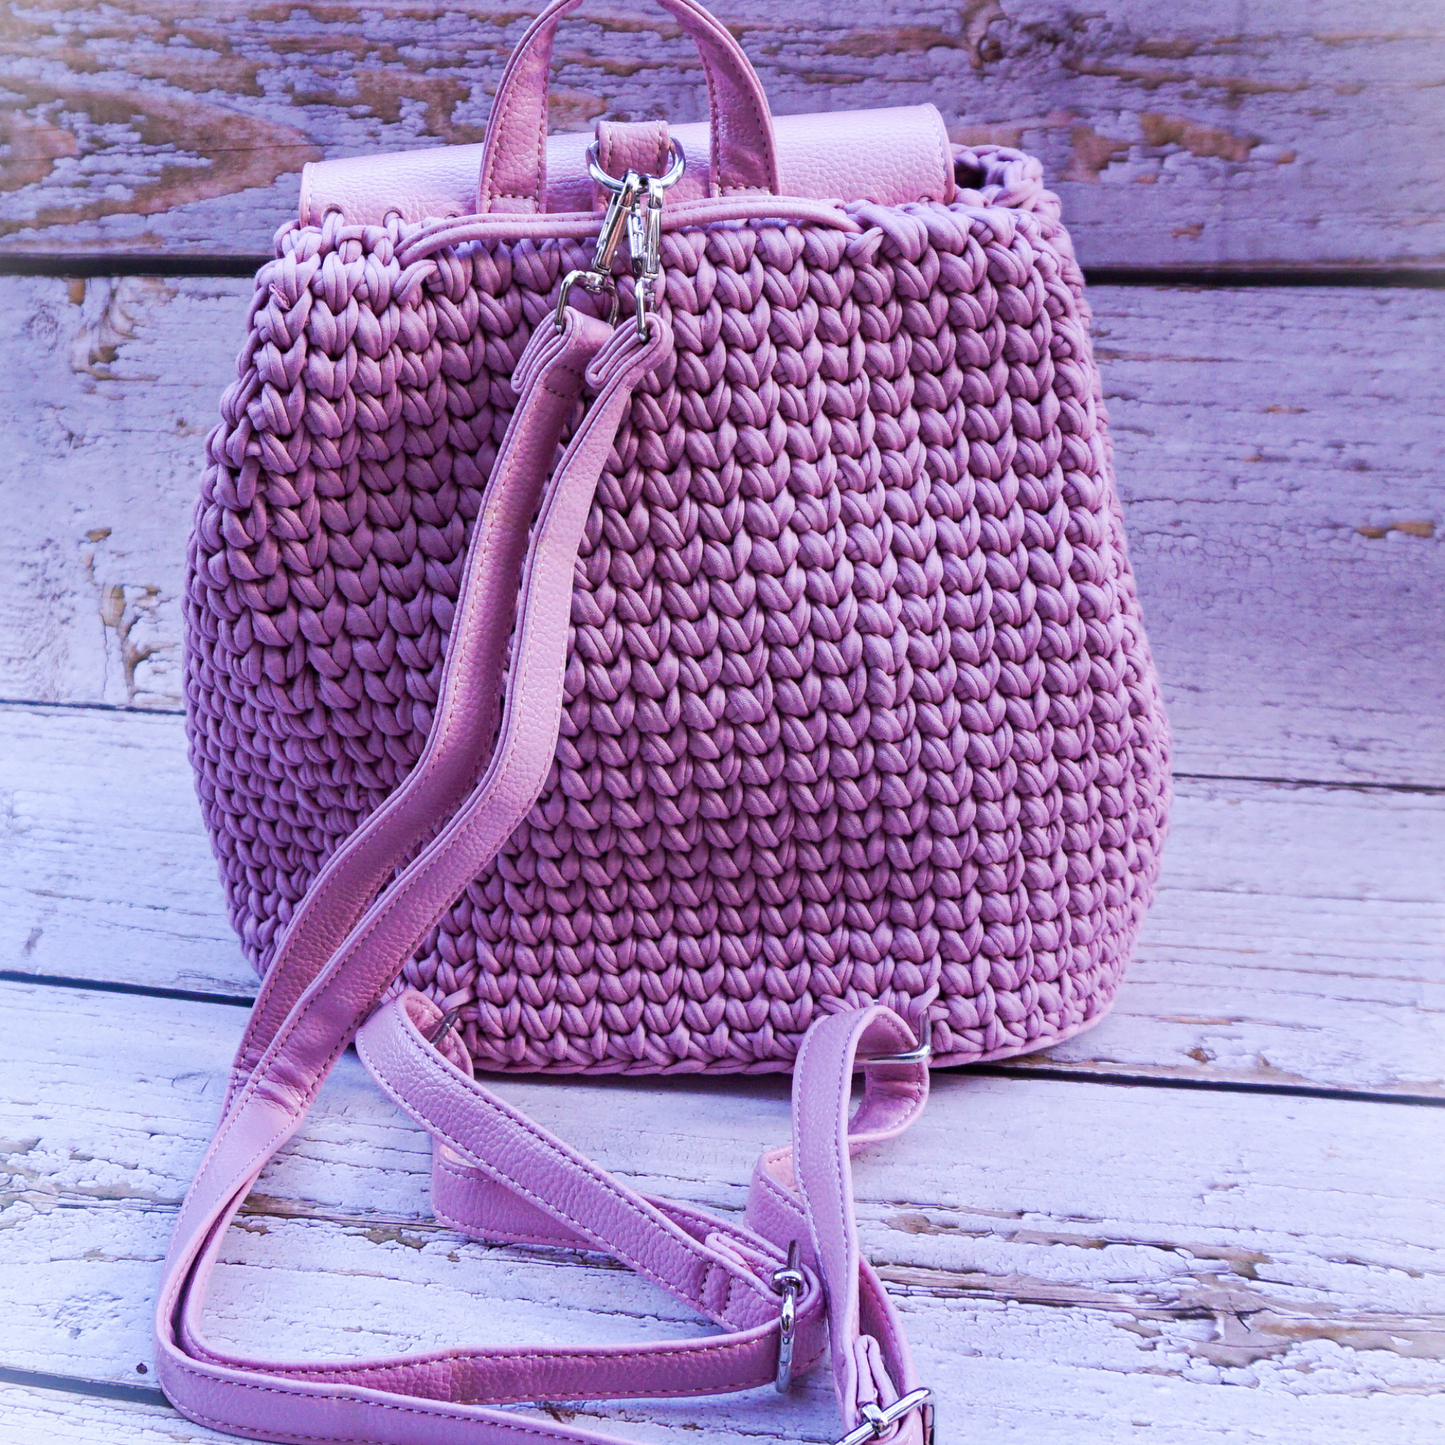 Crochet Backpack Kit with Leather Bag Base Accessories, Purse Hardware, Tshirt yarn and Crochet Pattern dark colors